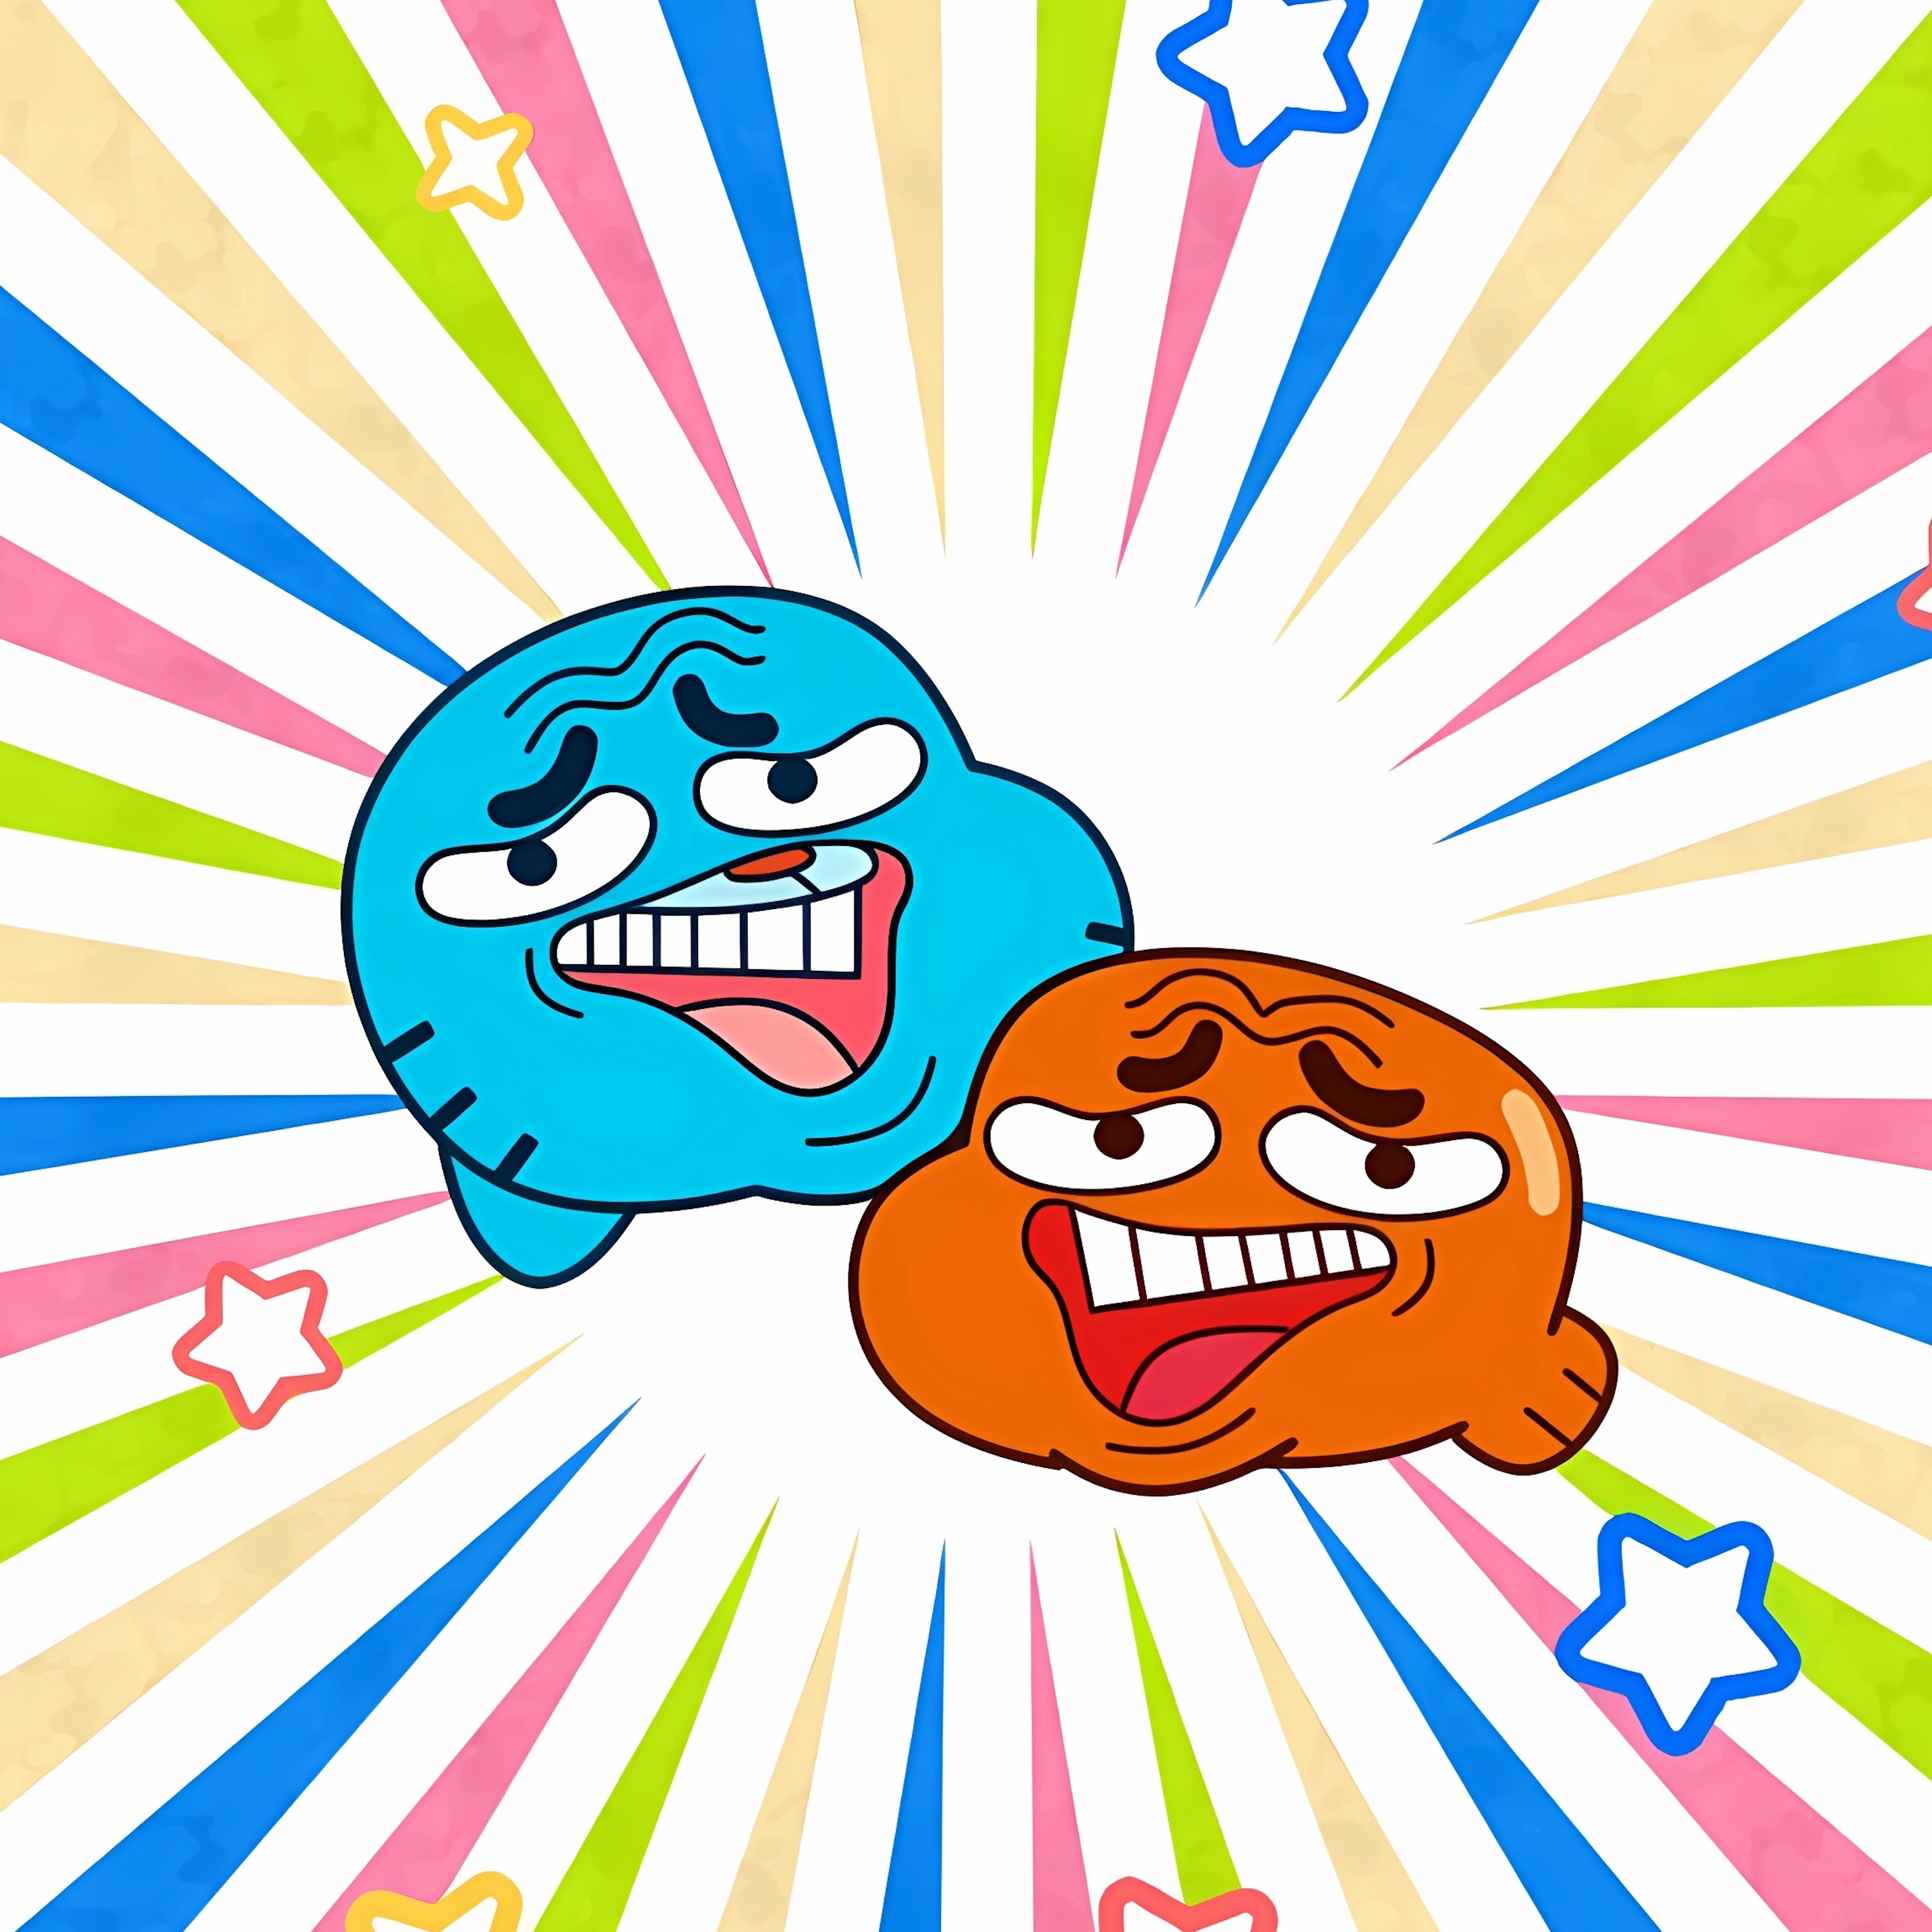 Vote For Gumball